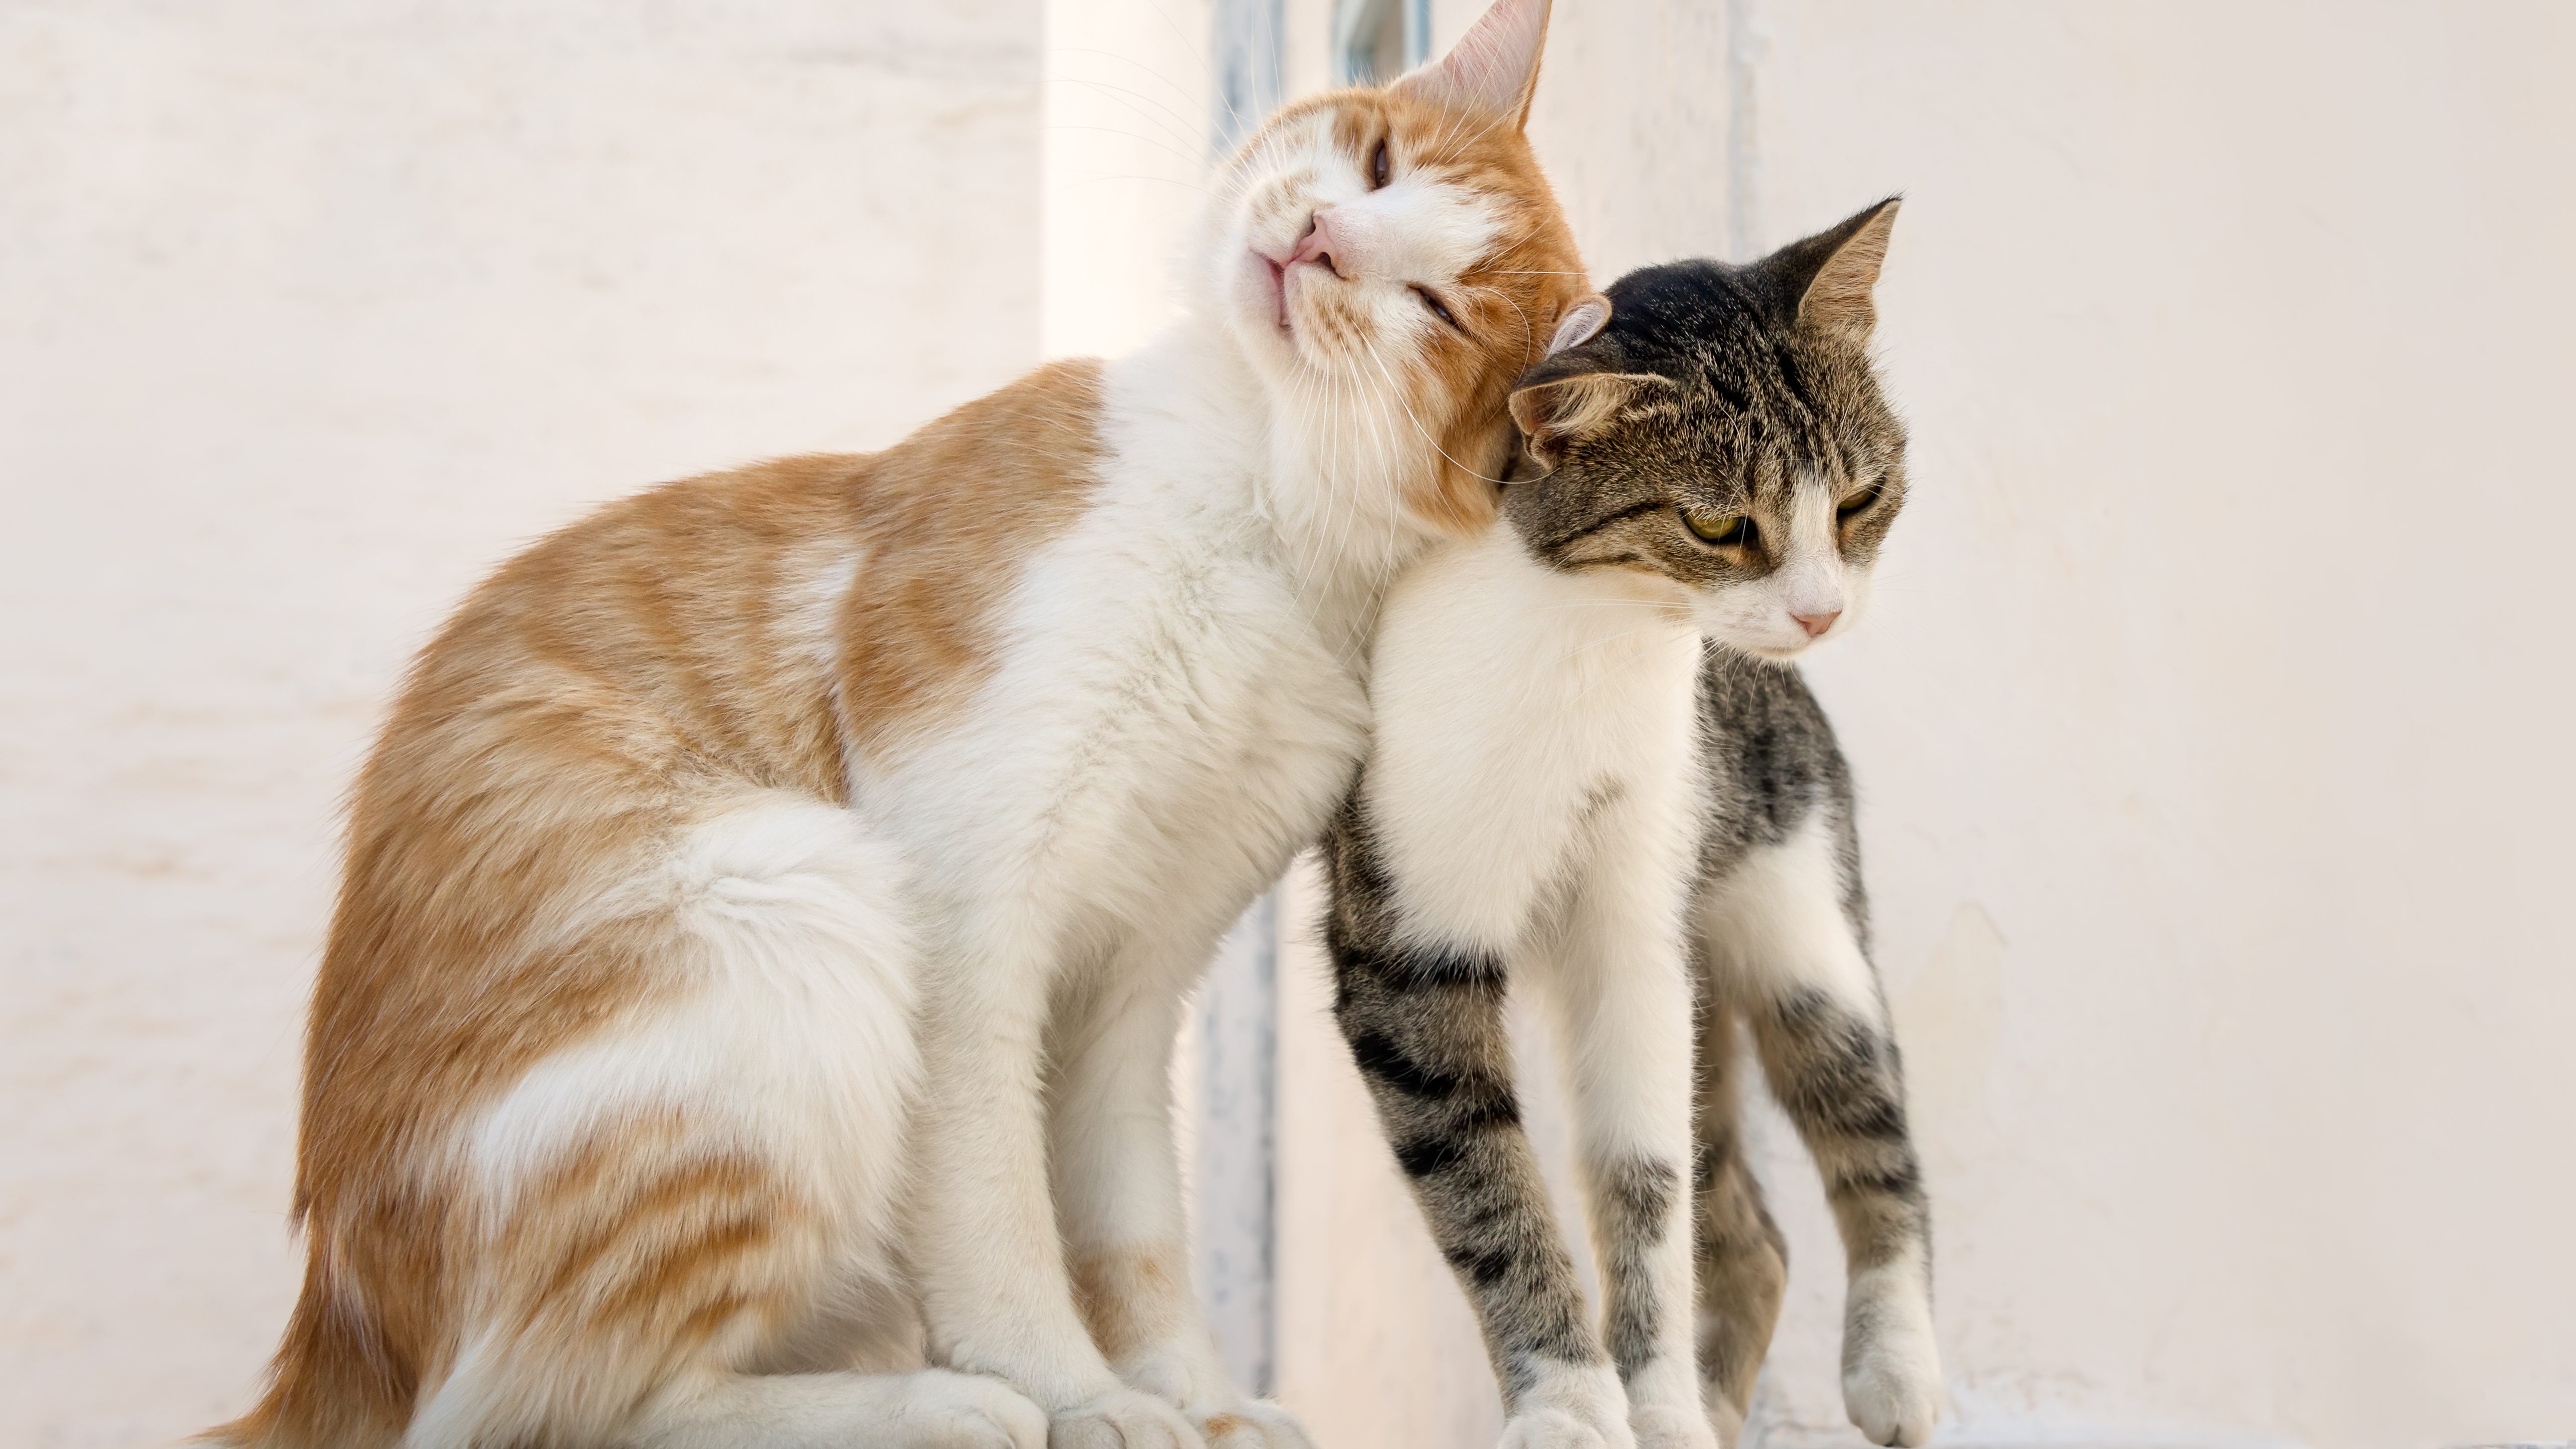 Two cute cats nuzzling